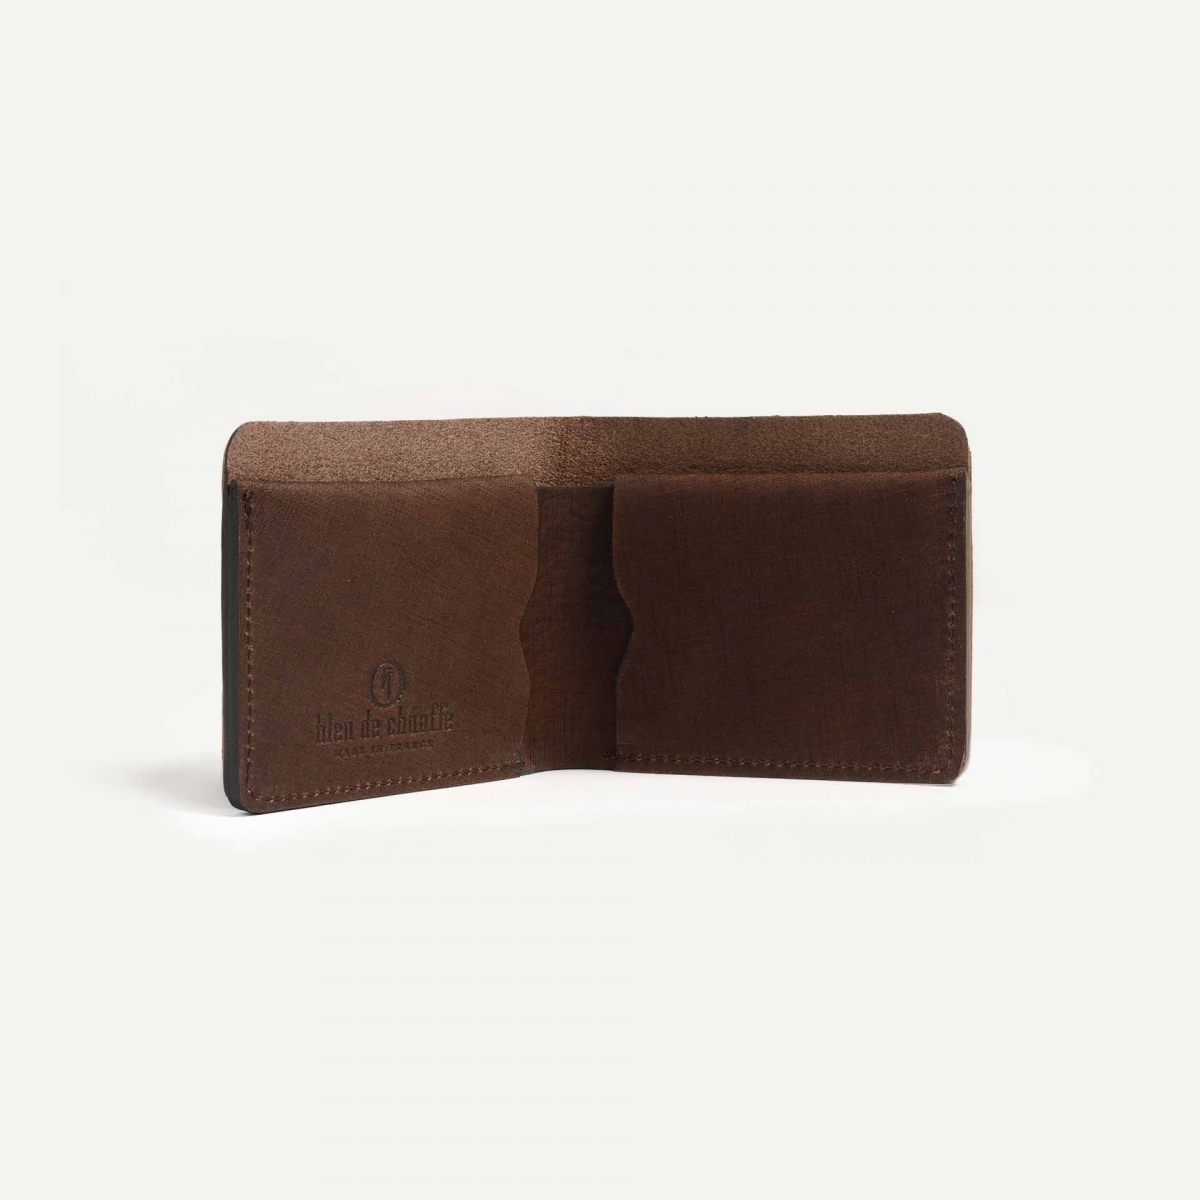 PEZE wallet - Coffee / Waxed Leather (image n°4)